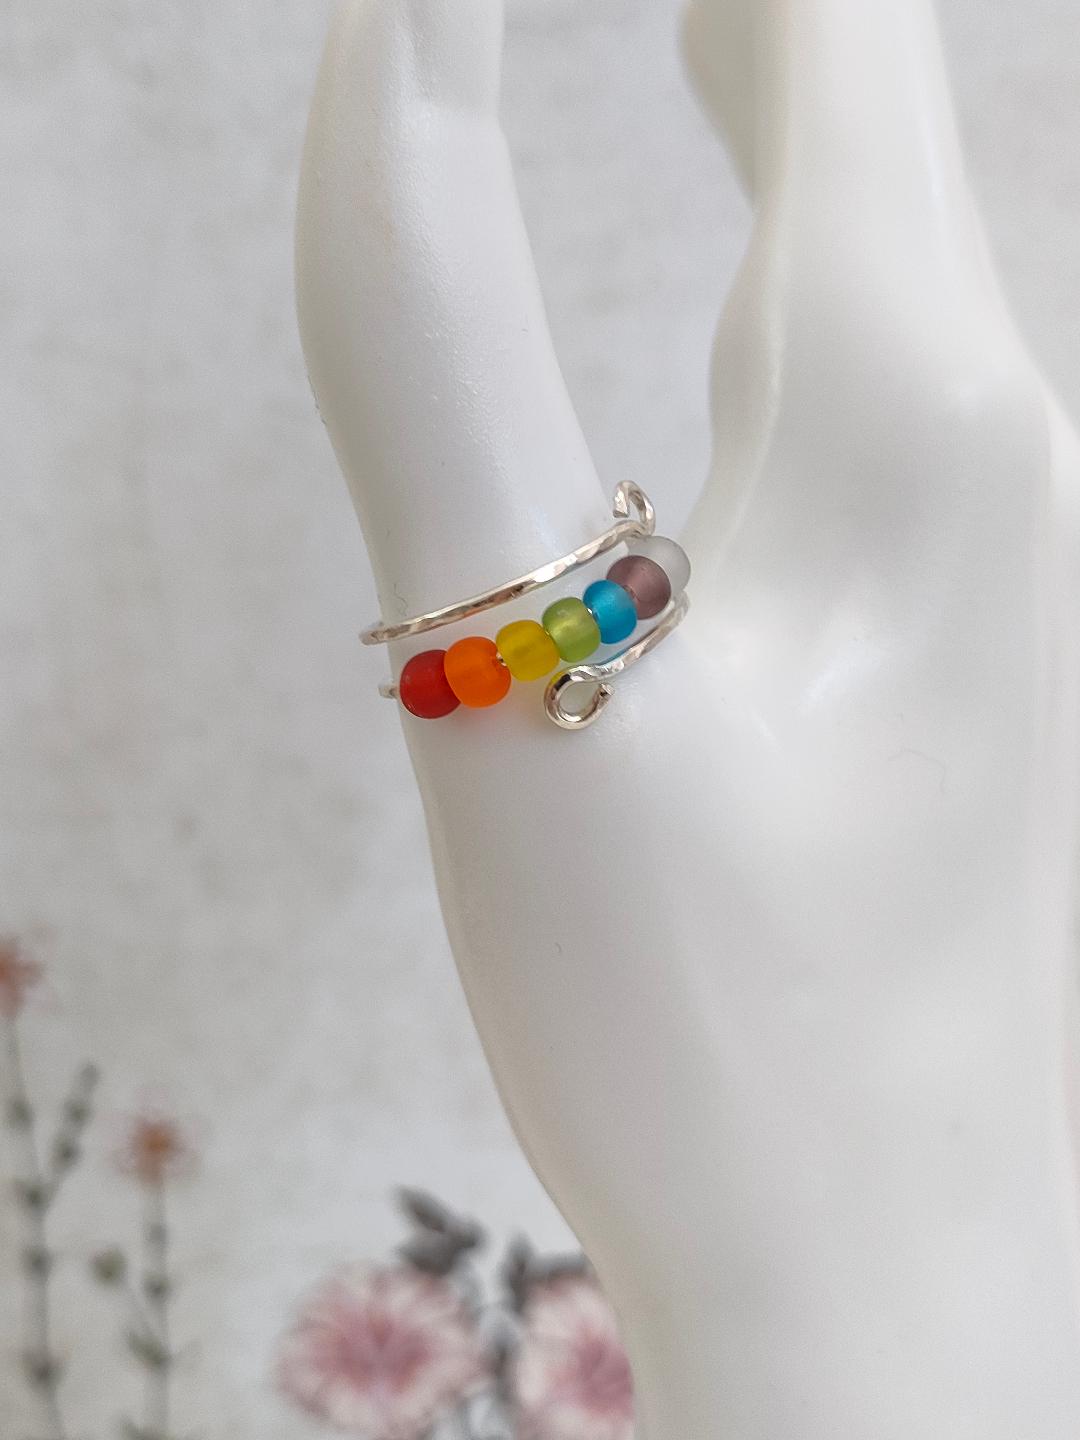 Fidget Thumb Ring, 925 Sterling Silver wire & balls, hand hammered texture ring, Rainbow Glass Anxiety Ring. (1mm thick)